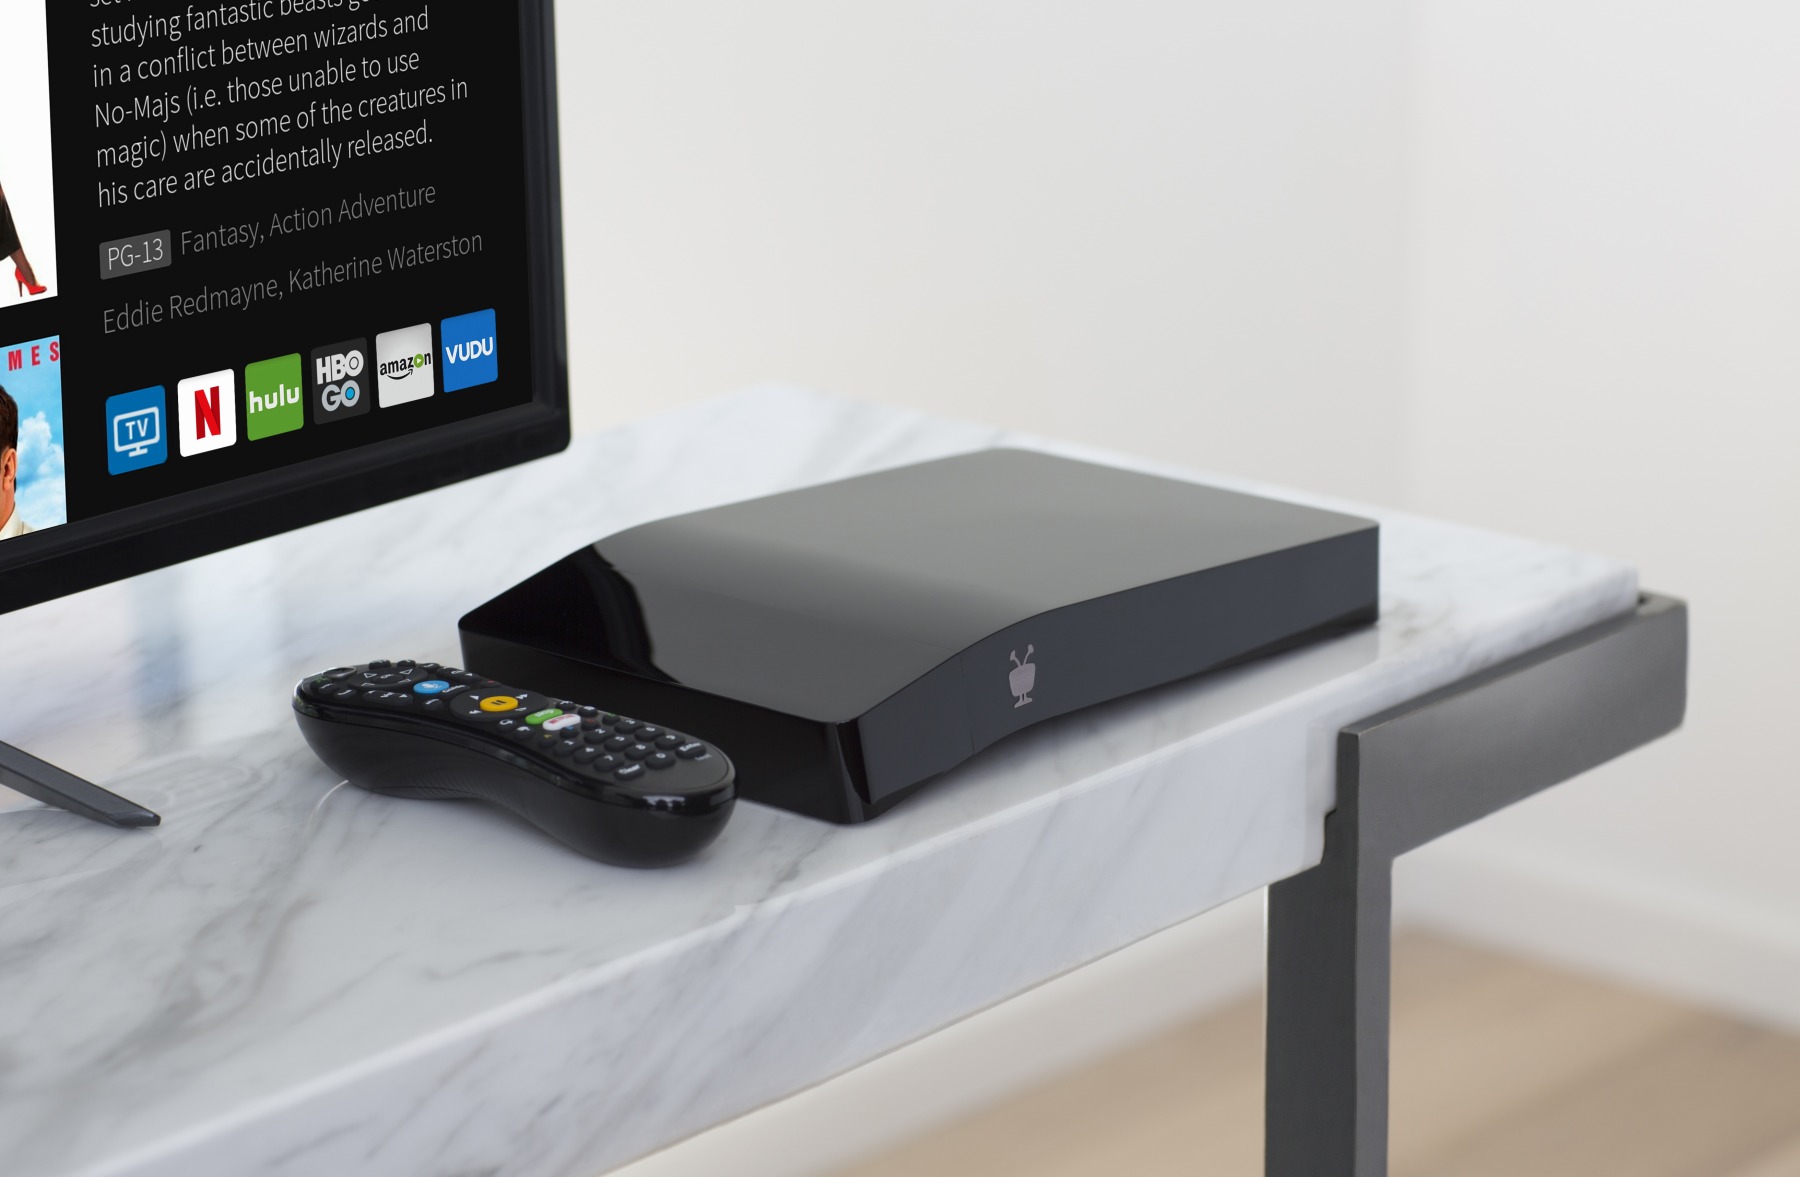 TiVo introduces new DVR line-up, adds comprehensive voice search